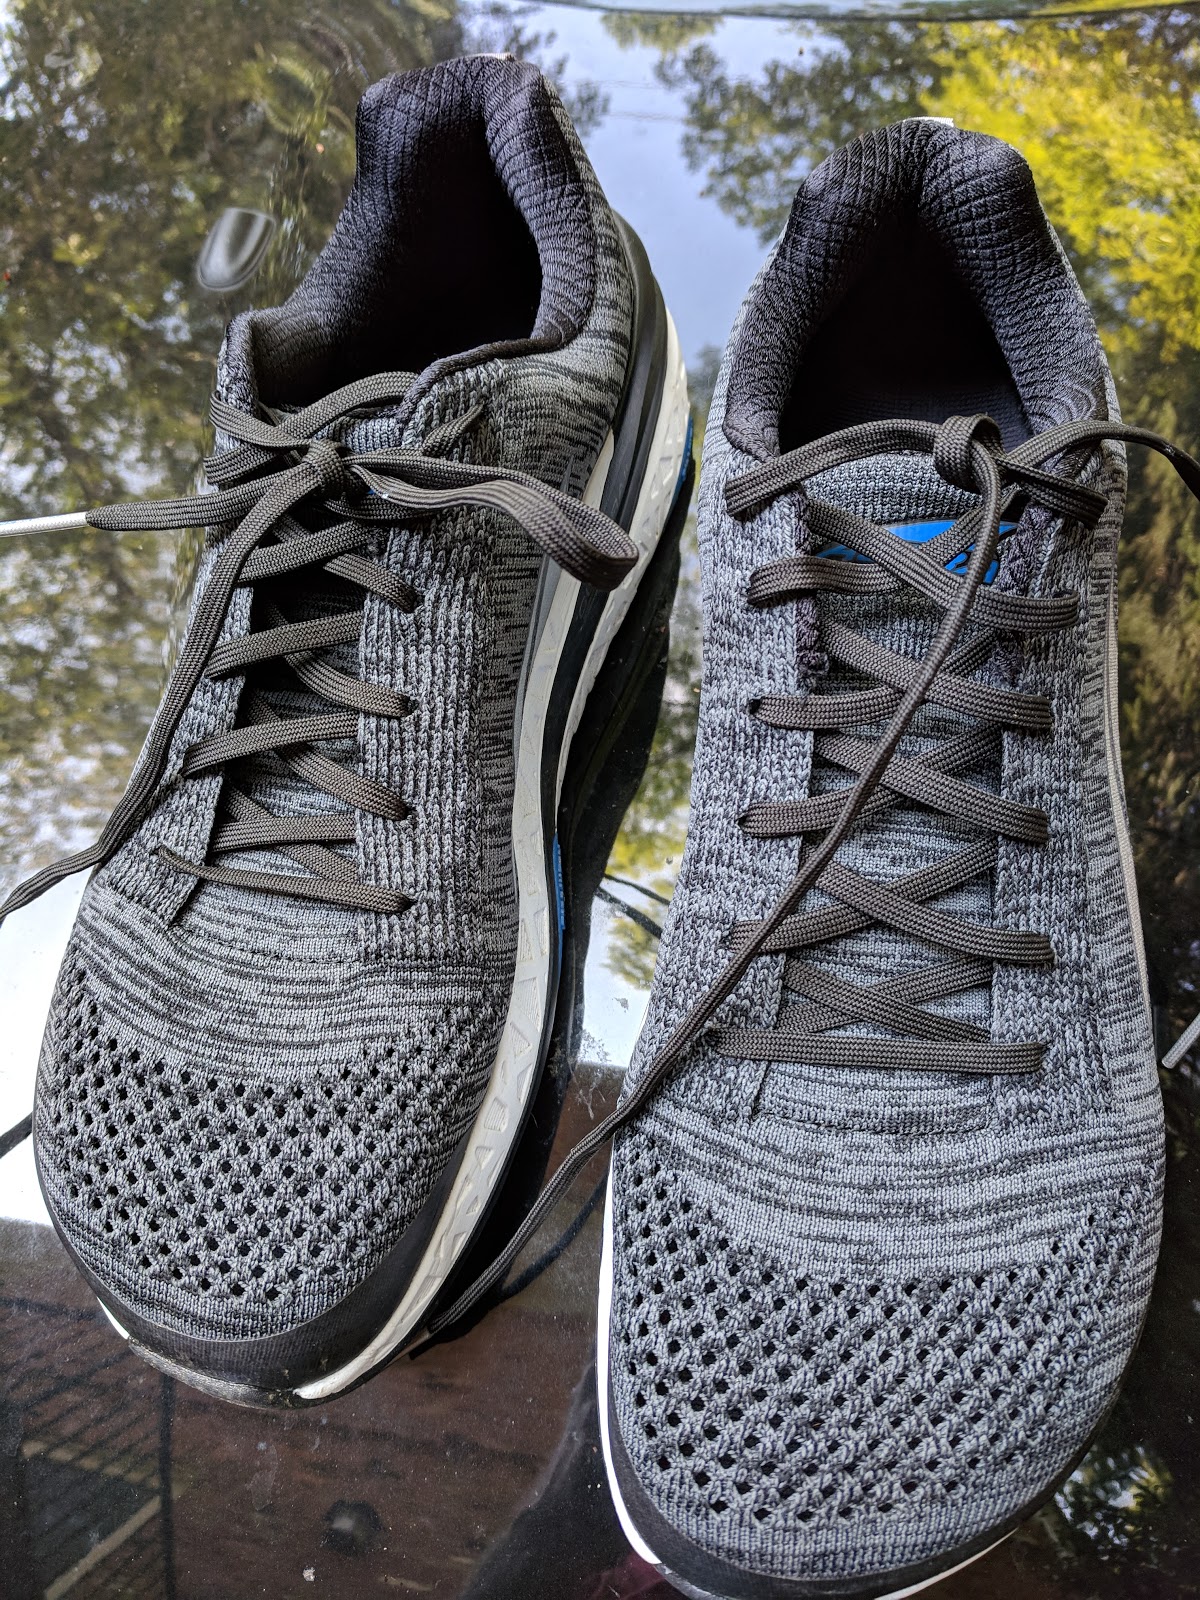 Midpack Gear: Altra Paradigm 4.0 review - good first try but not there yet